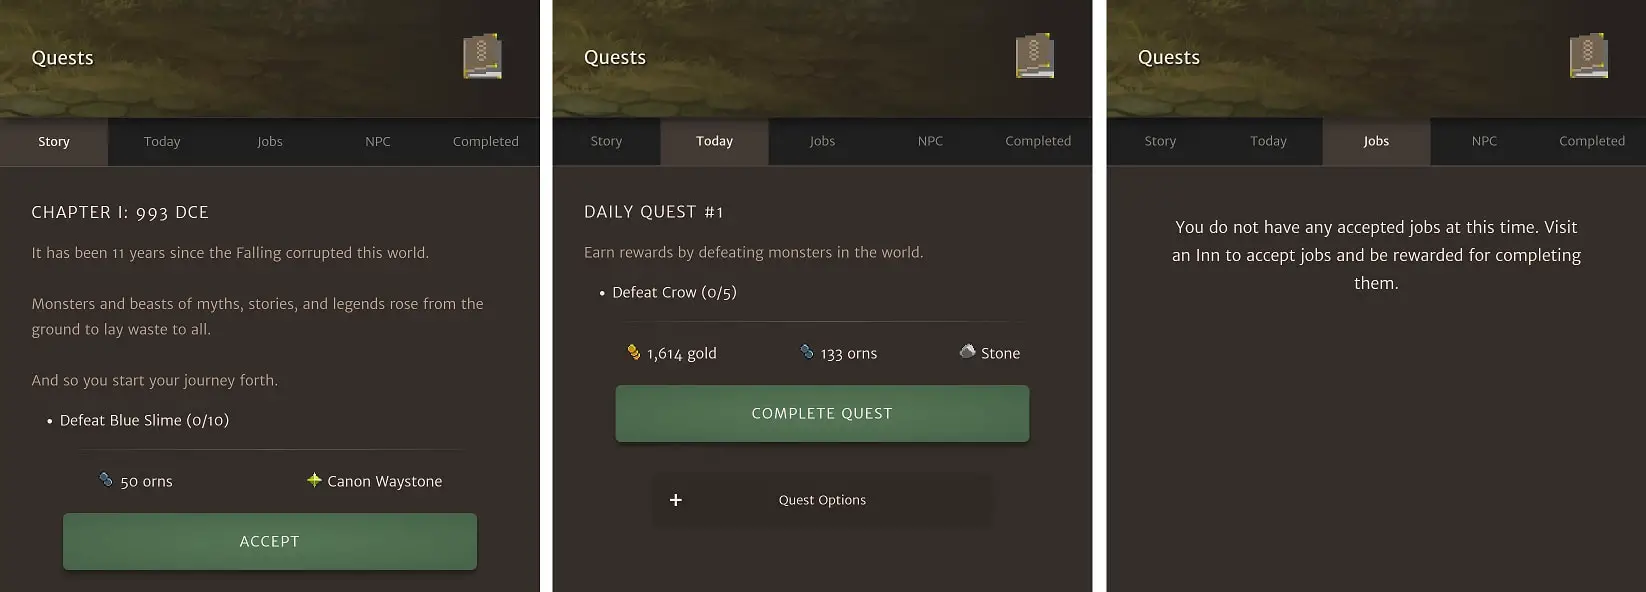 The quests menu in OrnaRPG shows your currently your character quests